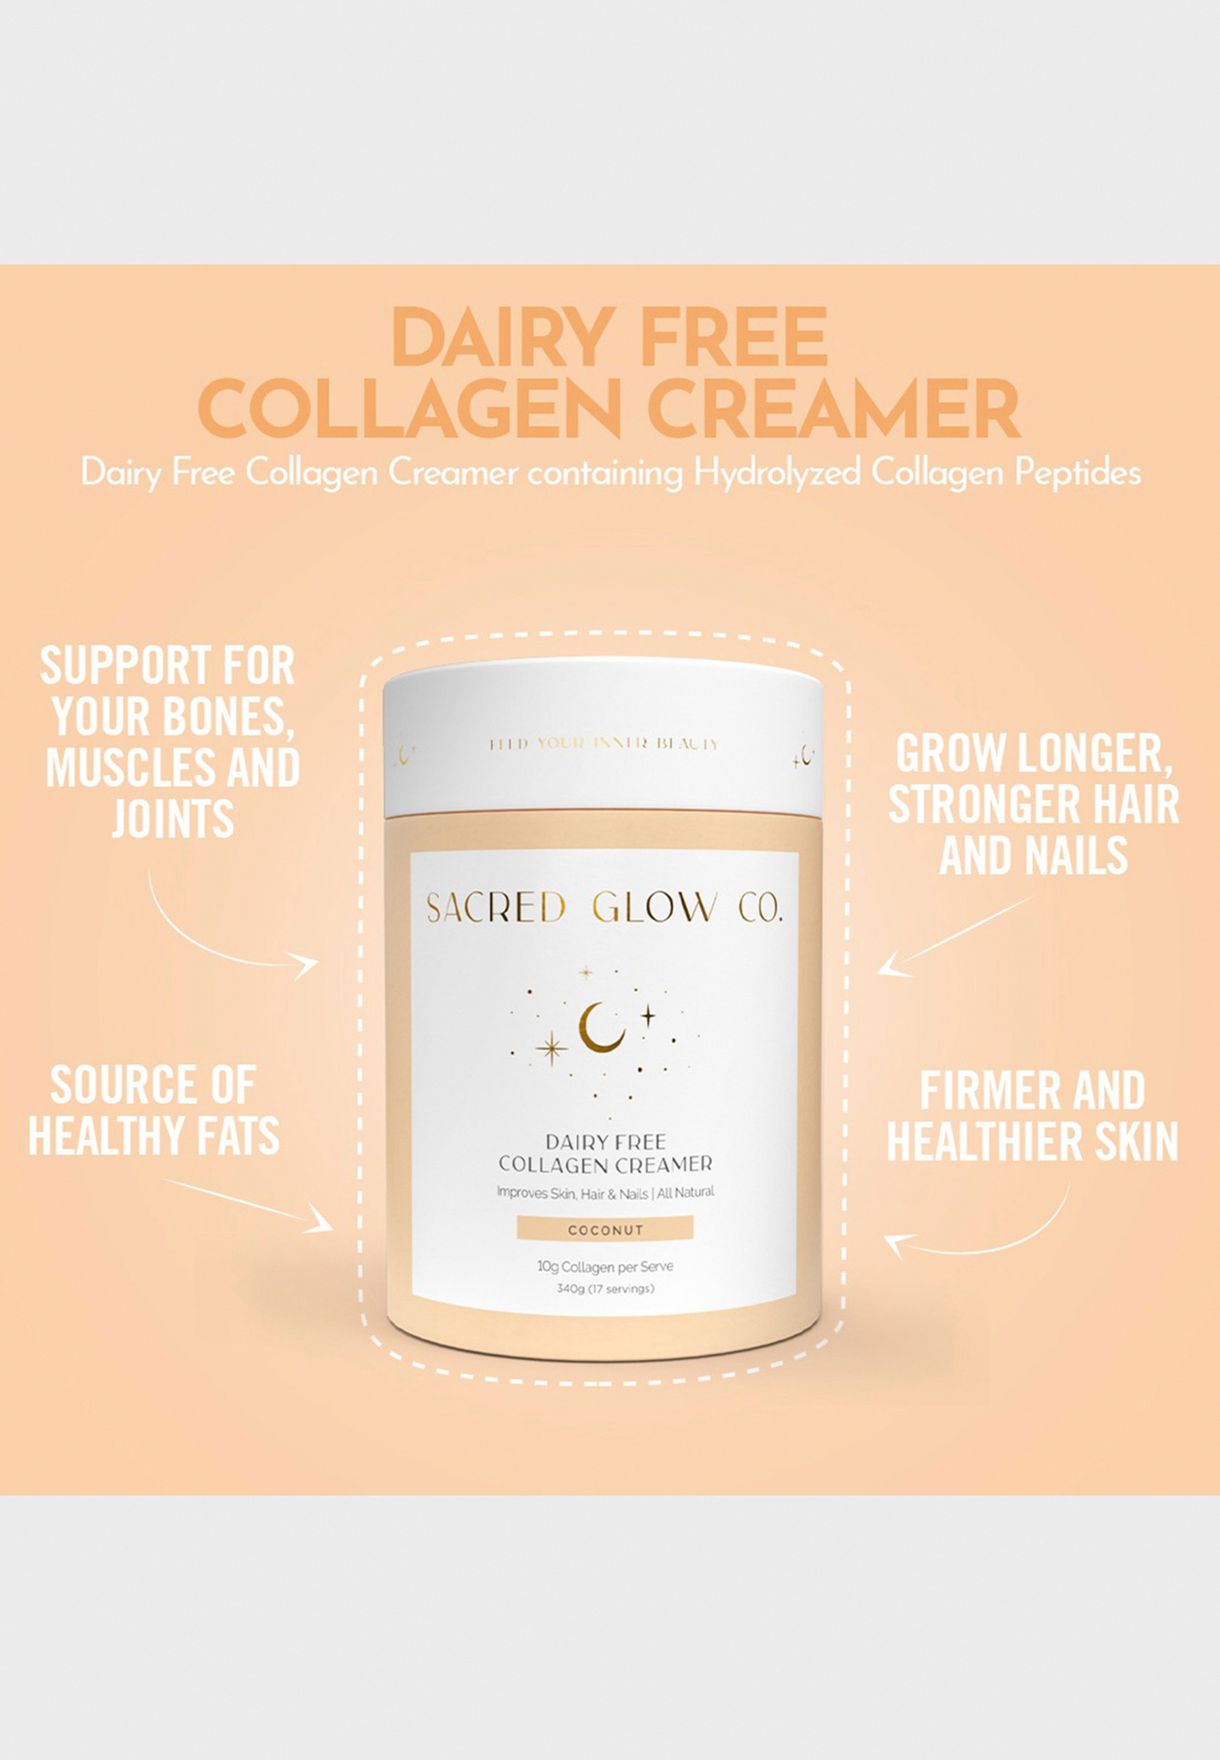 Collagen Creamer Dairy Free  - Natural Coconut Flavour (17 Servings)